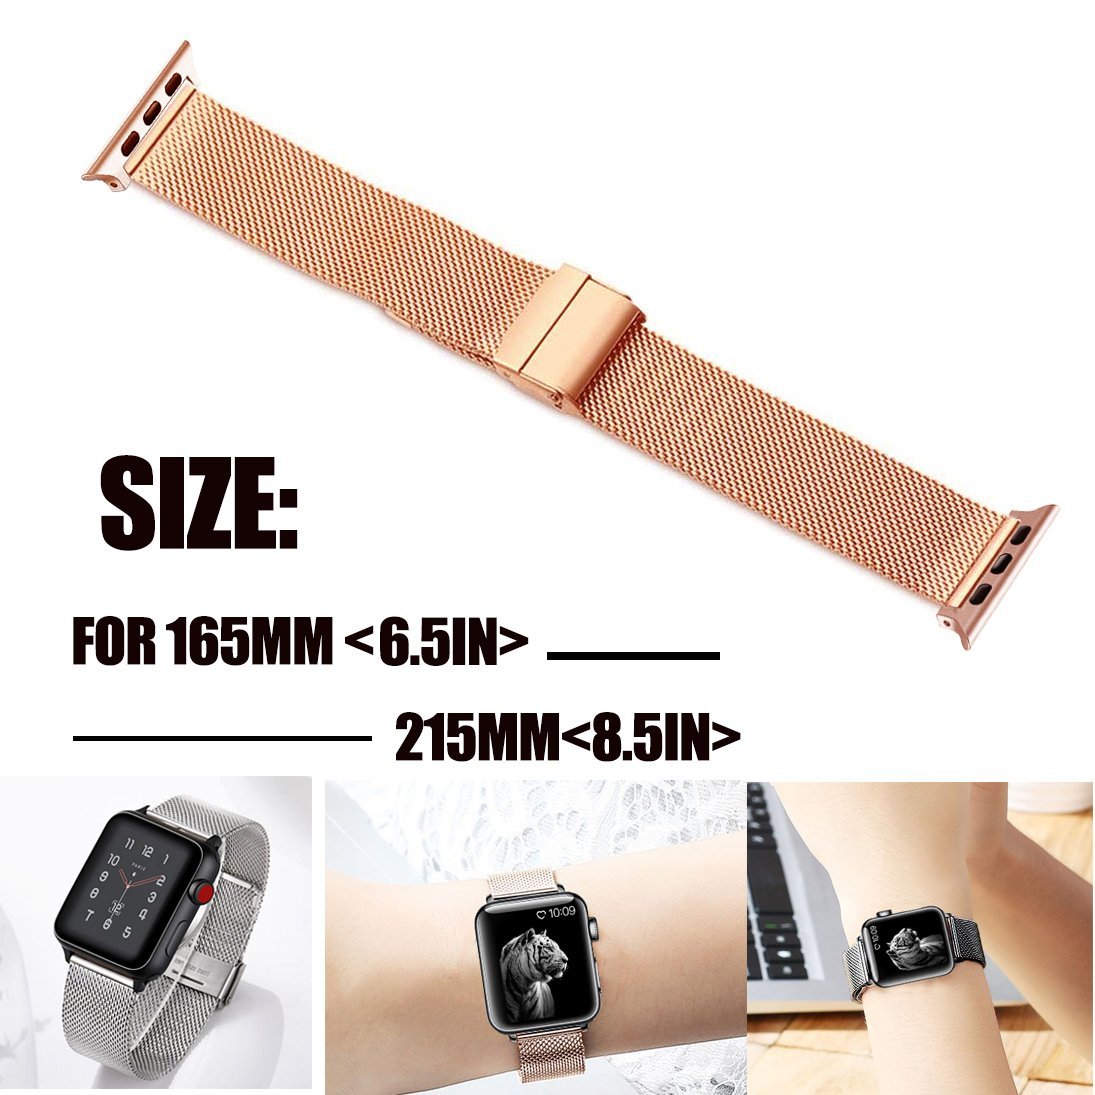 Apple Watch Band Collection  Milanese Buckle Loop Watch Band – My